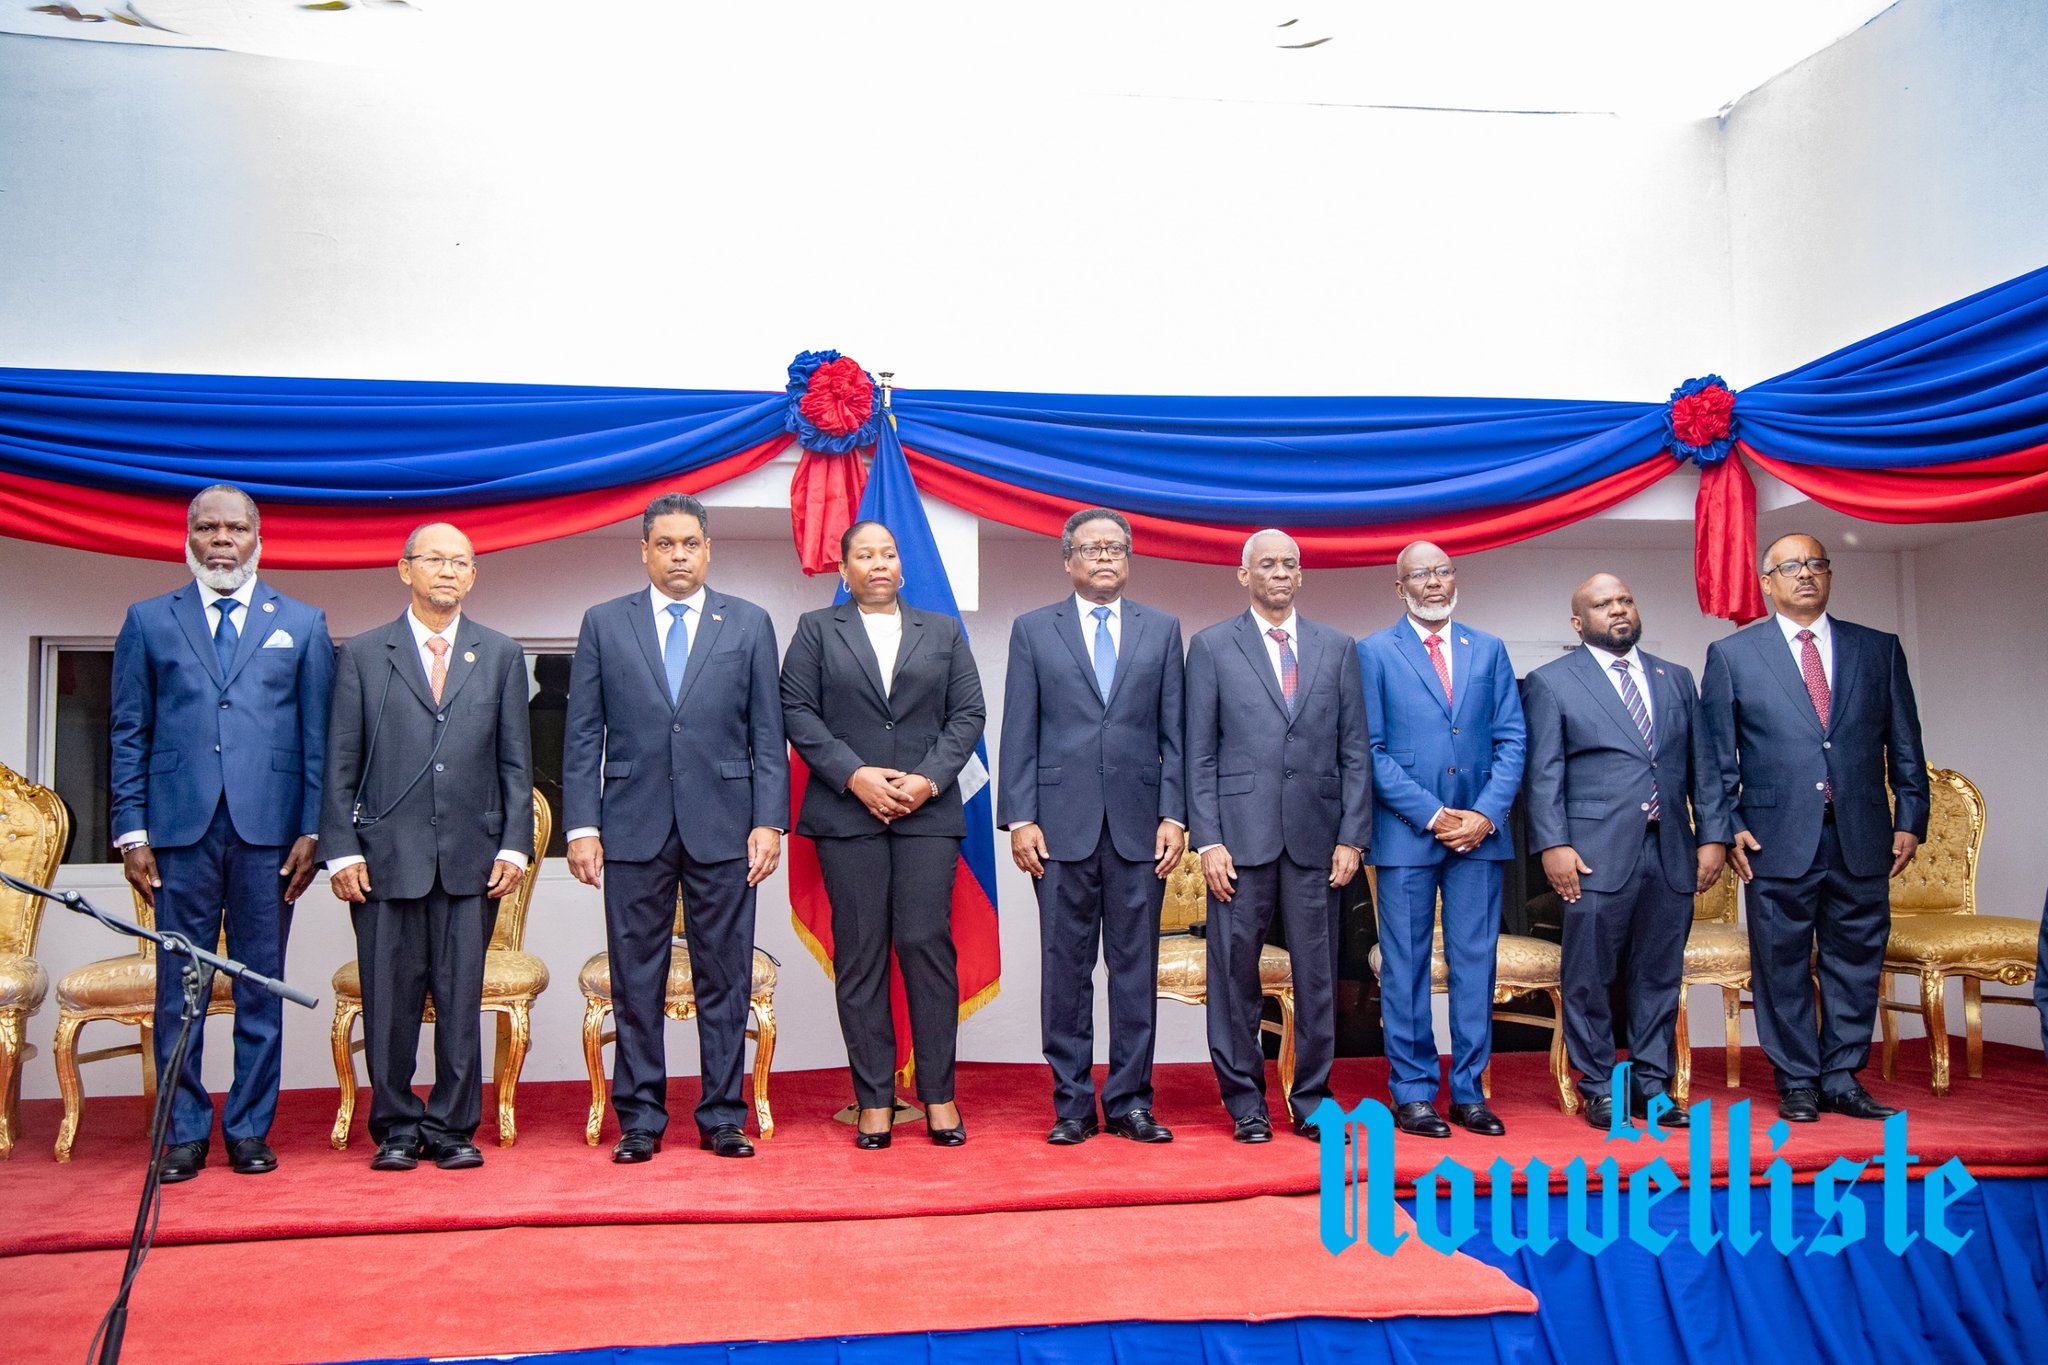 The 9 members of the Presidential Council Photo: Le Nouvelliste